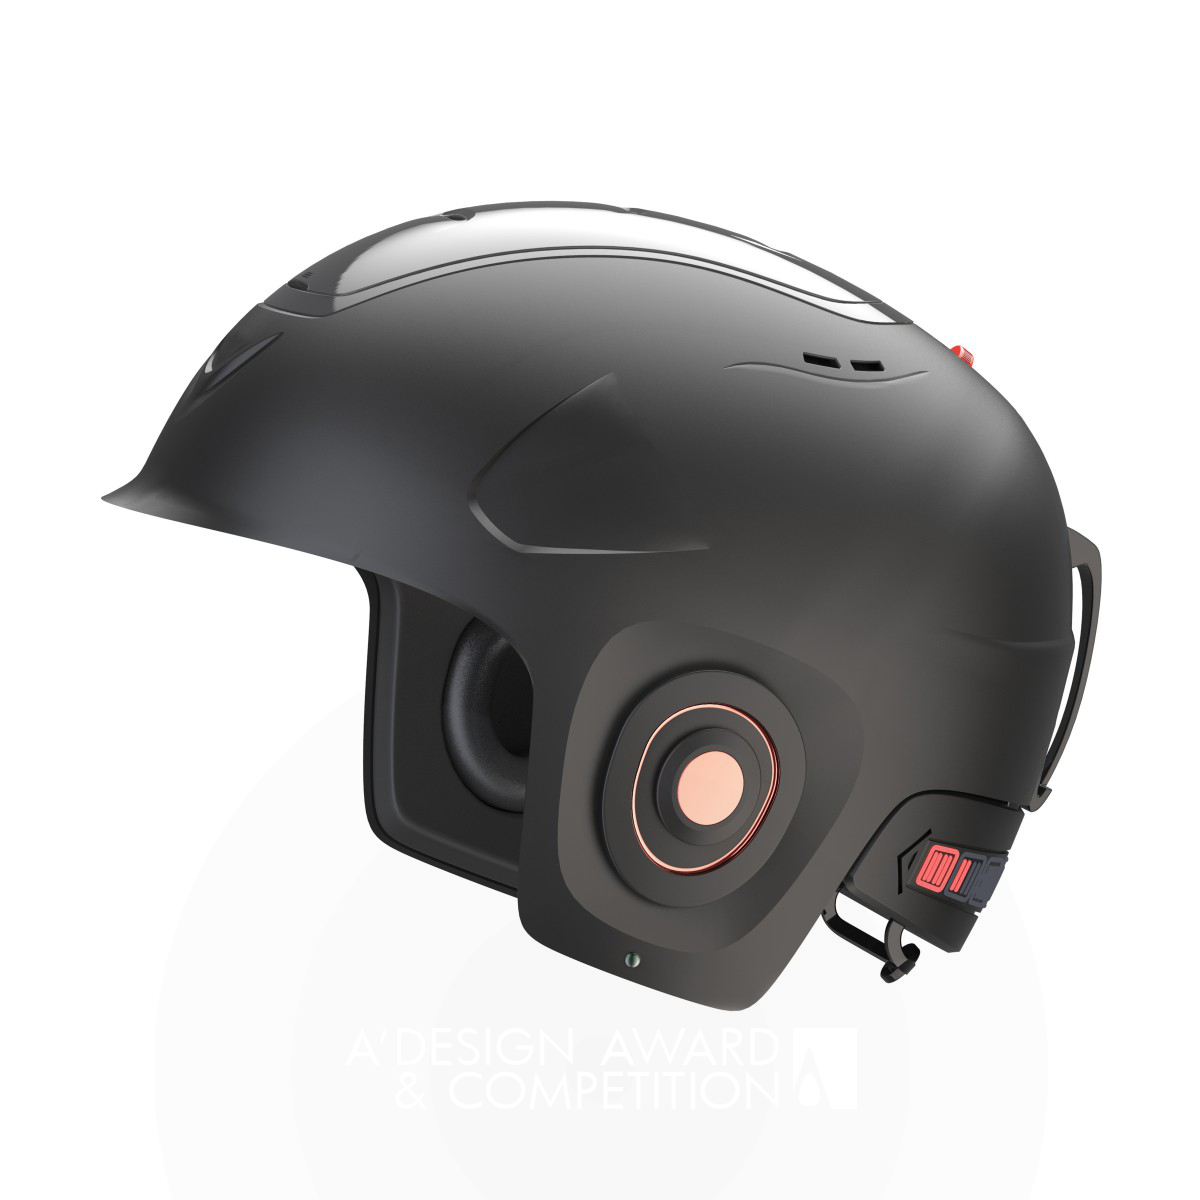 X Skier Indicated Direction Helmet